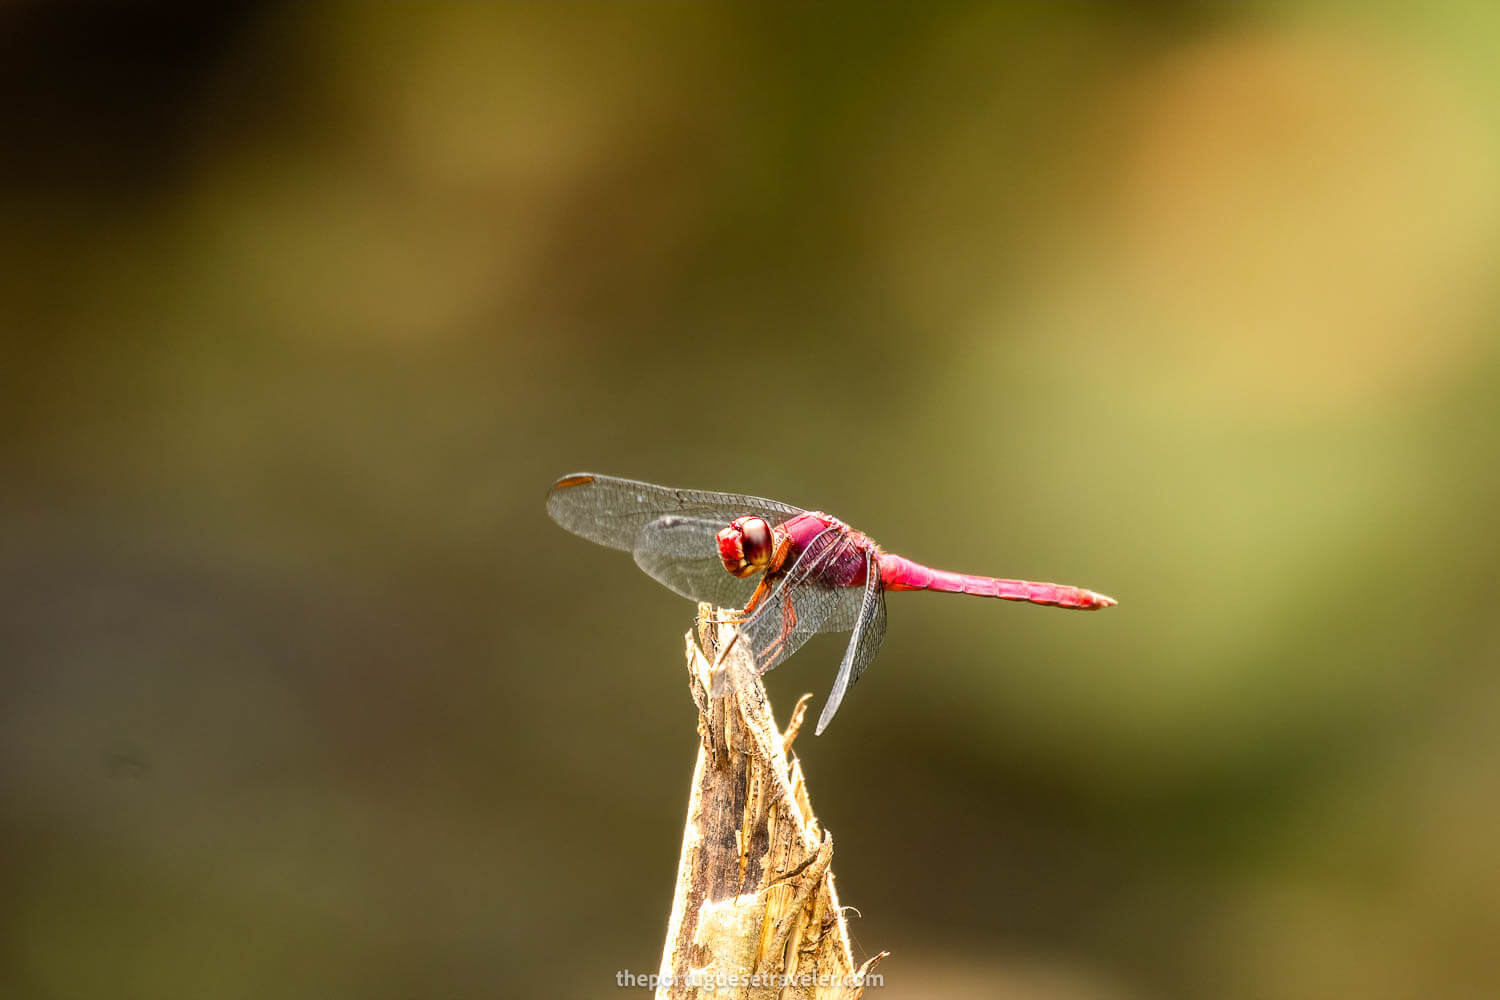 A Dragonfly on the Birdwatching Tour in Mindo